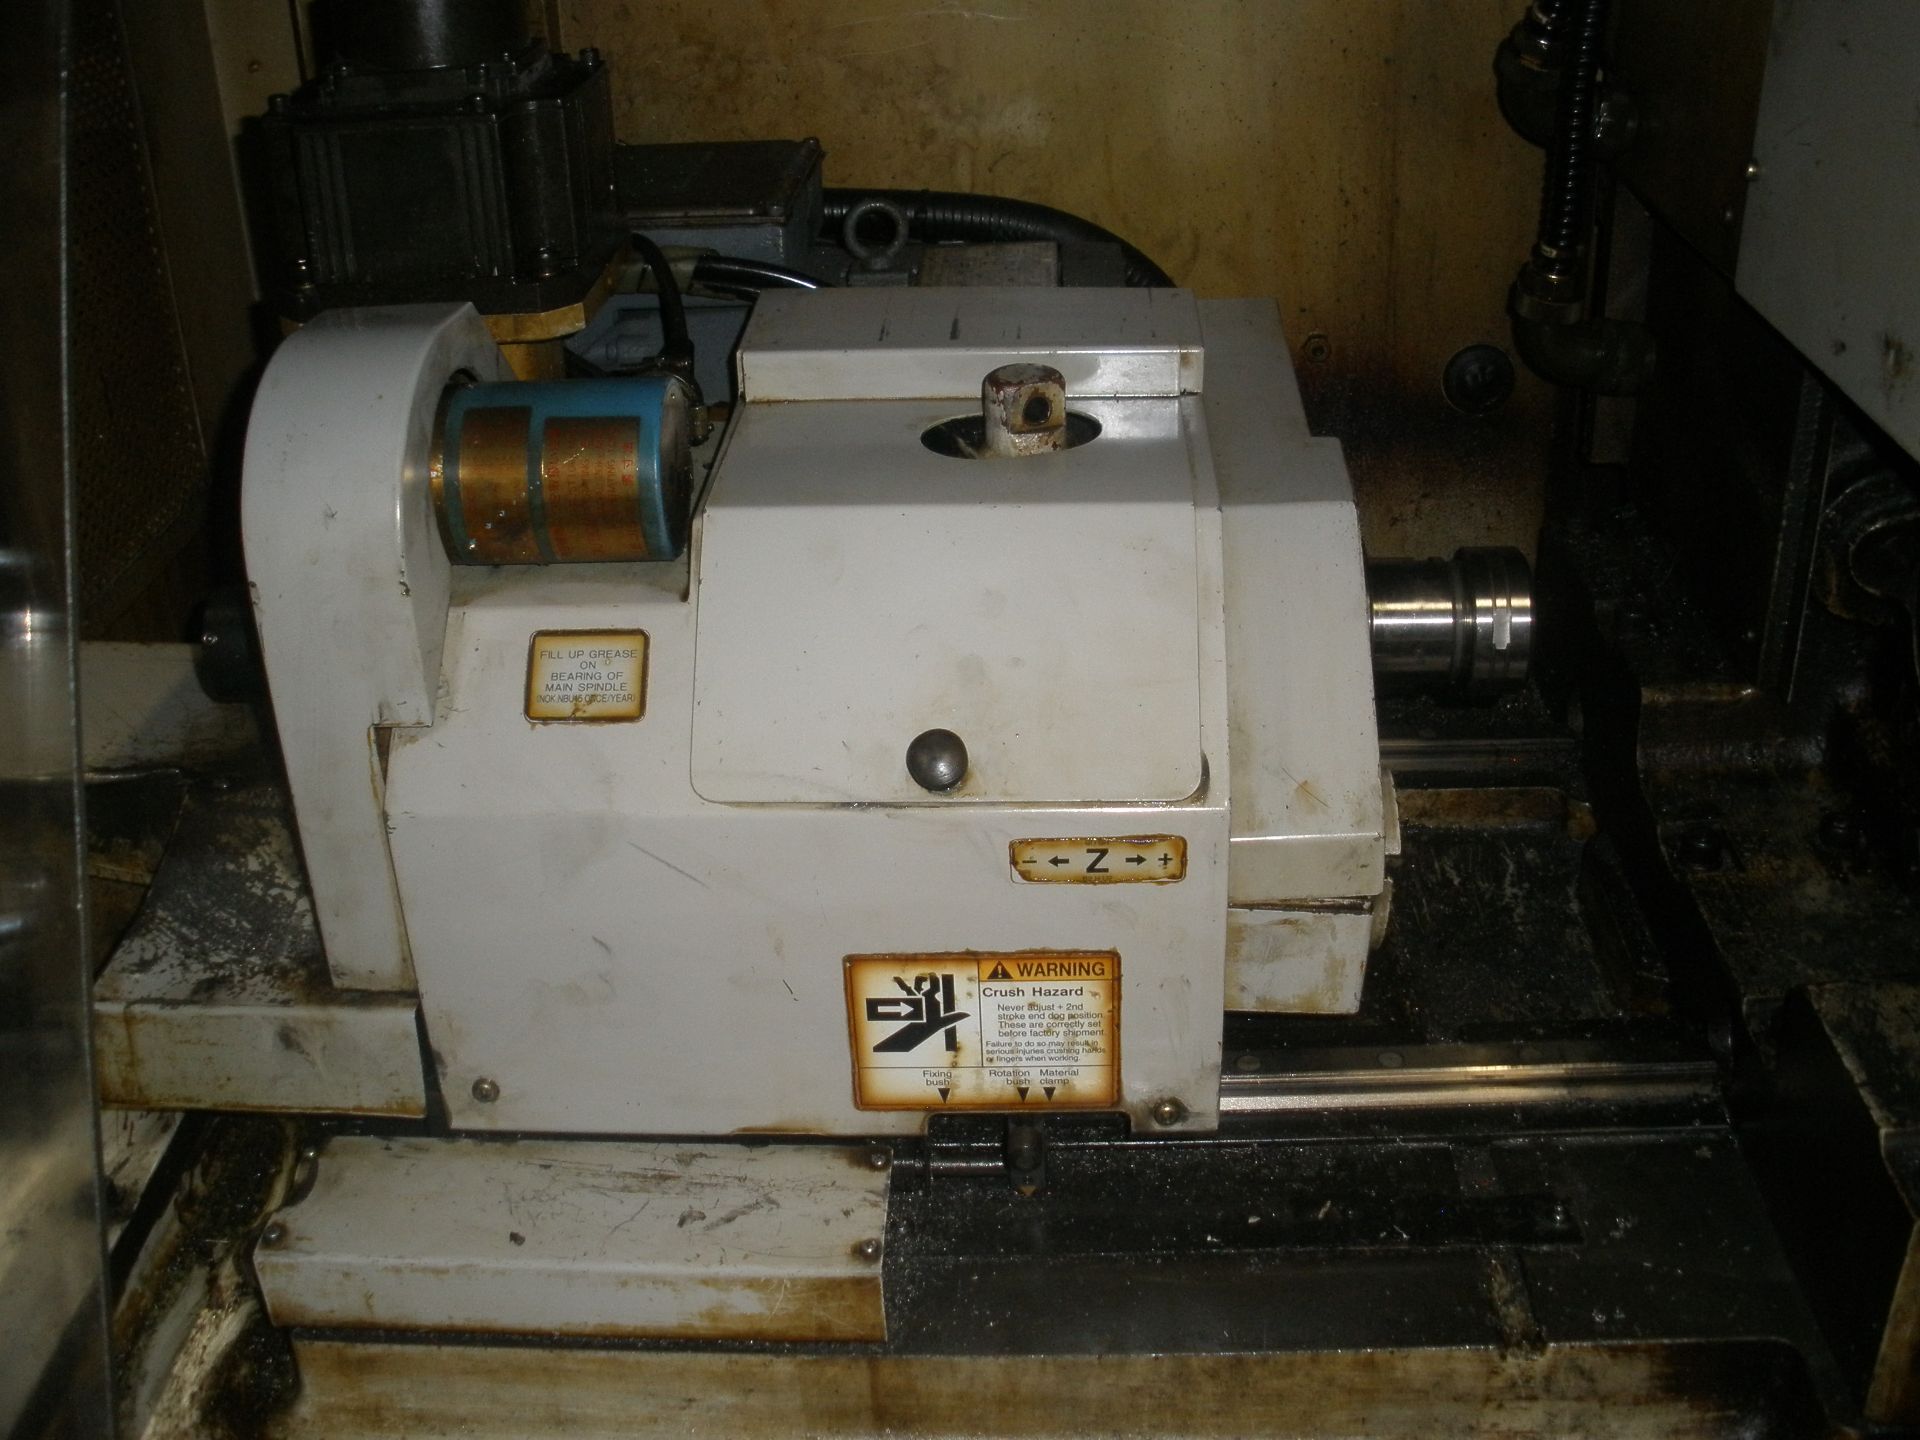 2003 Nomura NN20B5 CNC Swiss Lathe, Sub Spindle Live Tools With Video - Image 9 of 11